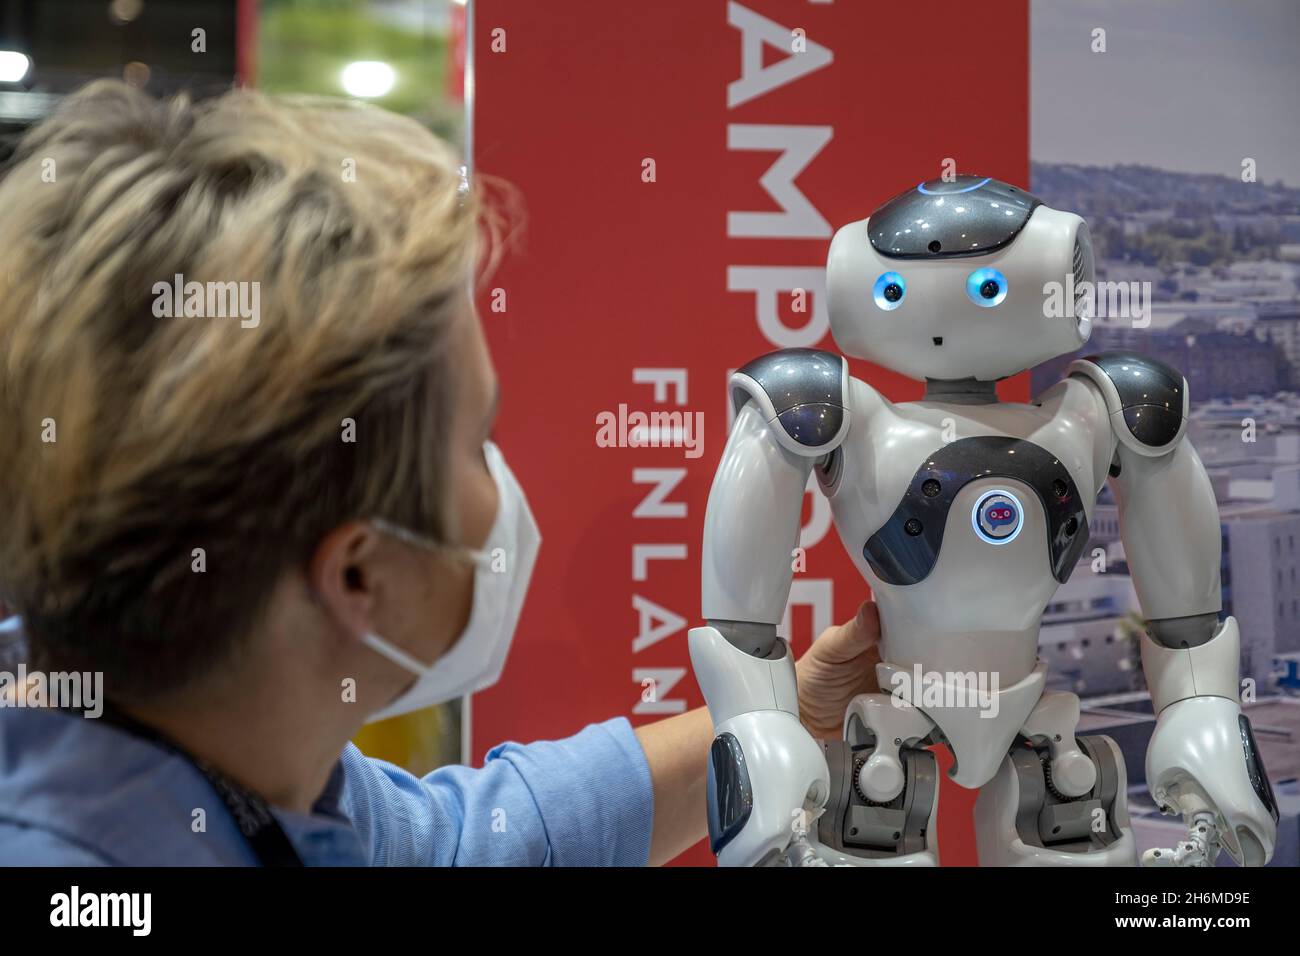 Barcelona, Spain. 16th Nov, 2021. Elias Robot, a Finnish learning solution  to learn languages, is seen during the SmartCity Expo World Congress  2021.Held in Barcelona since 2011 the SmartCity Expo World Congress